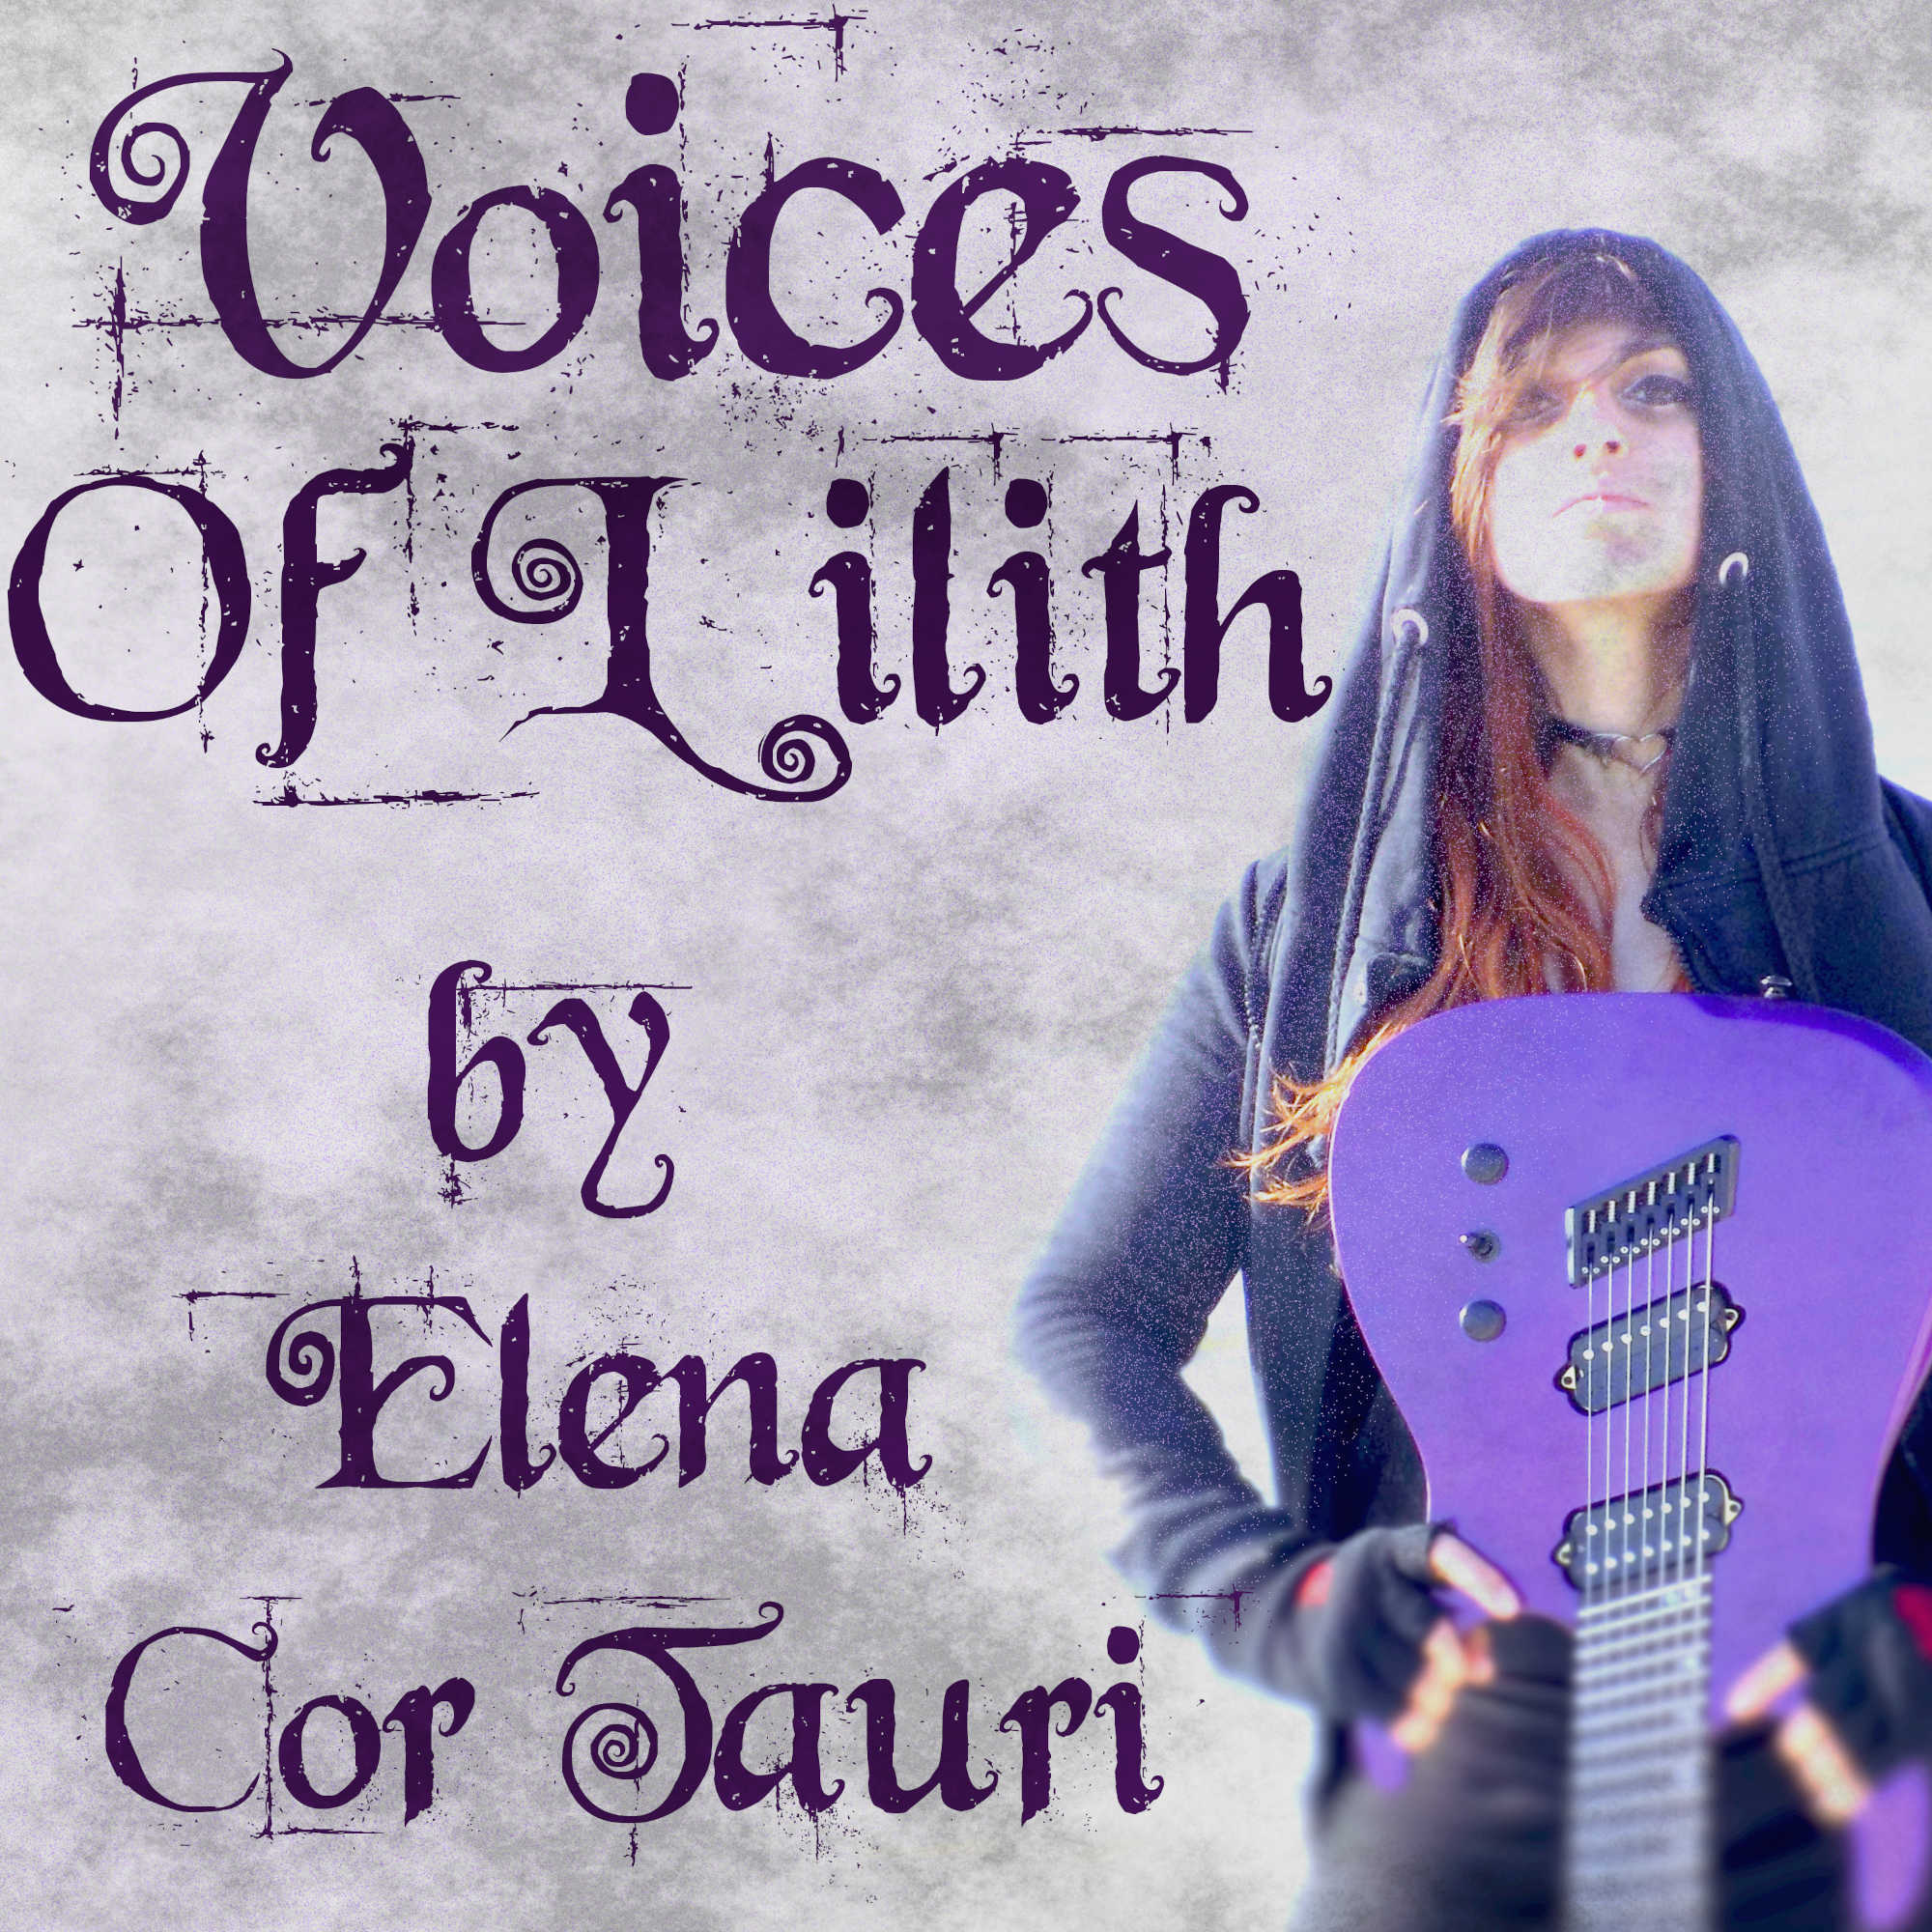 Voices Of Lilith